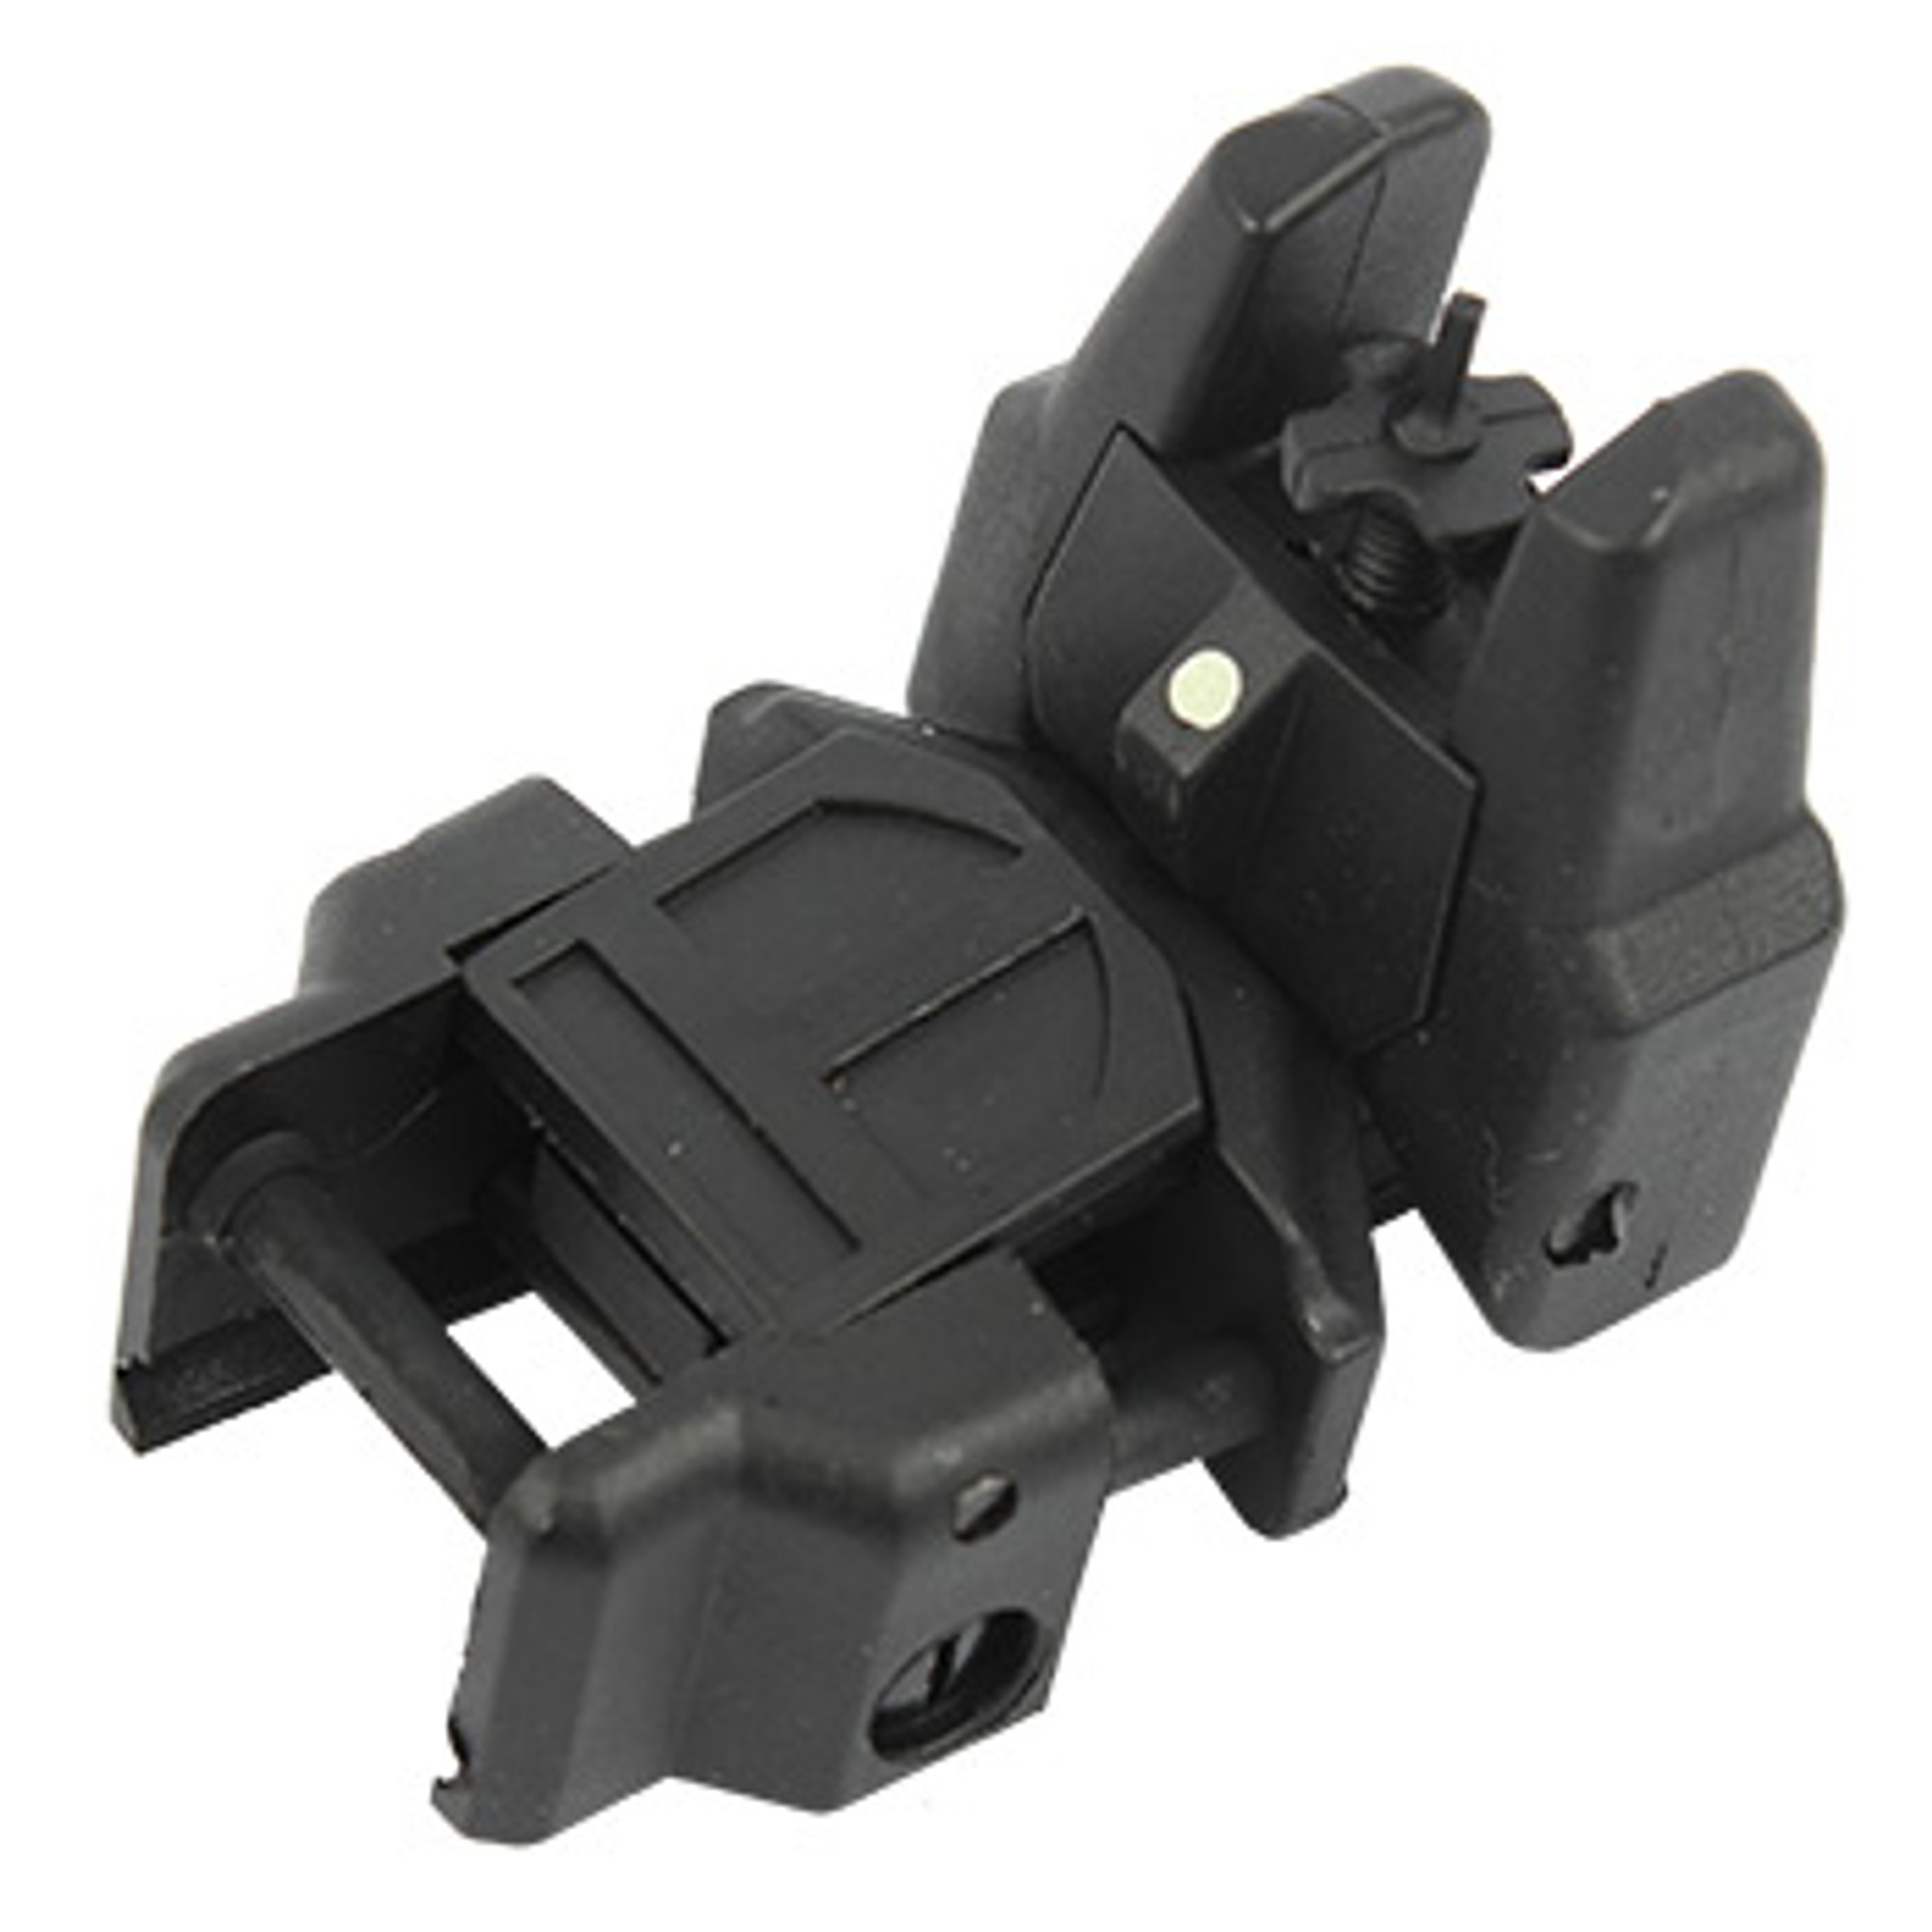 Tiberius Arms EXO Back-Up Sight - Front